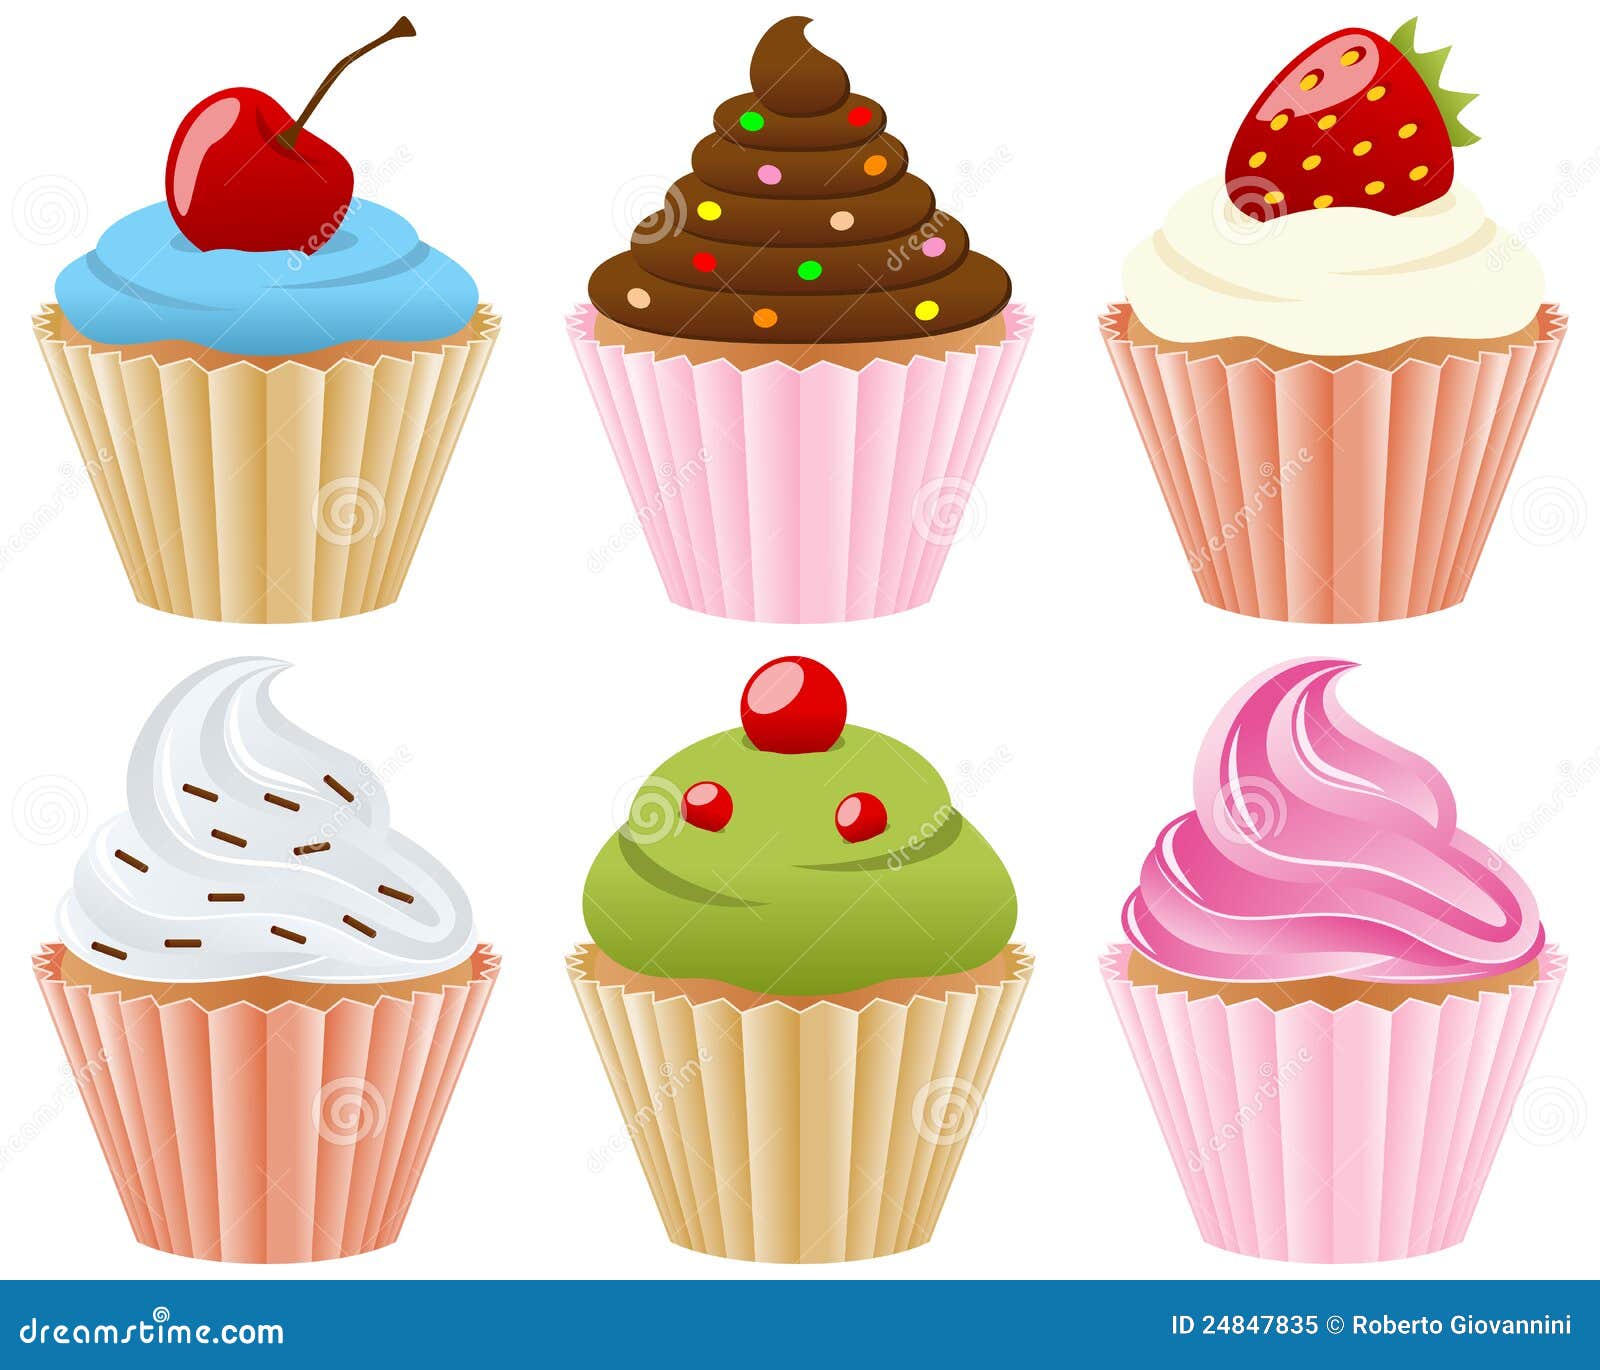 sweet cupcakes collection